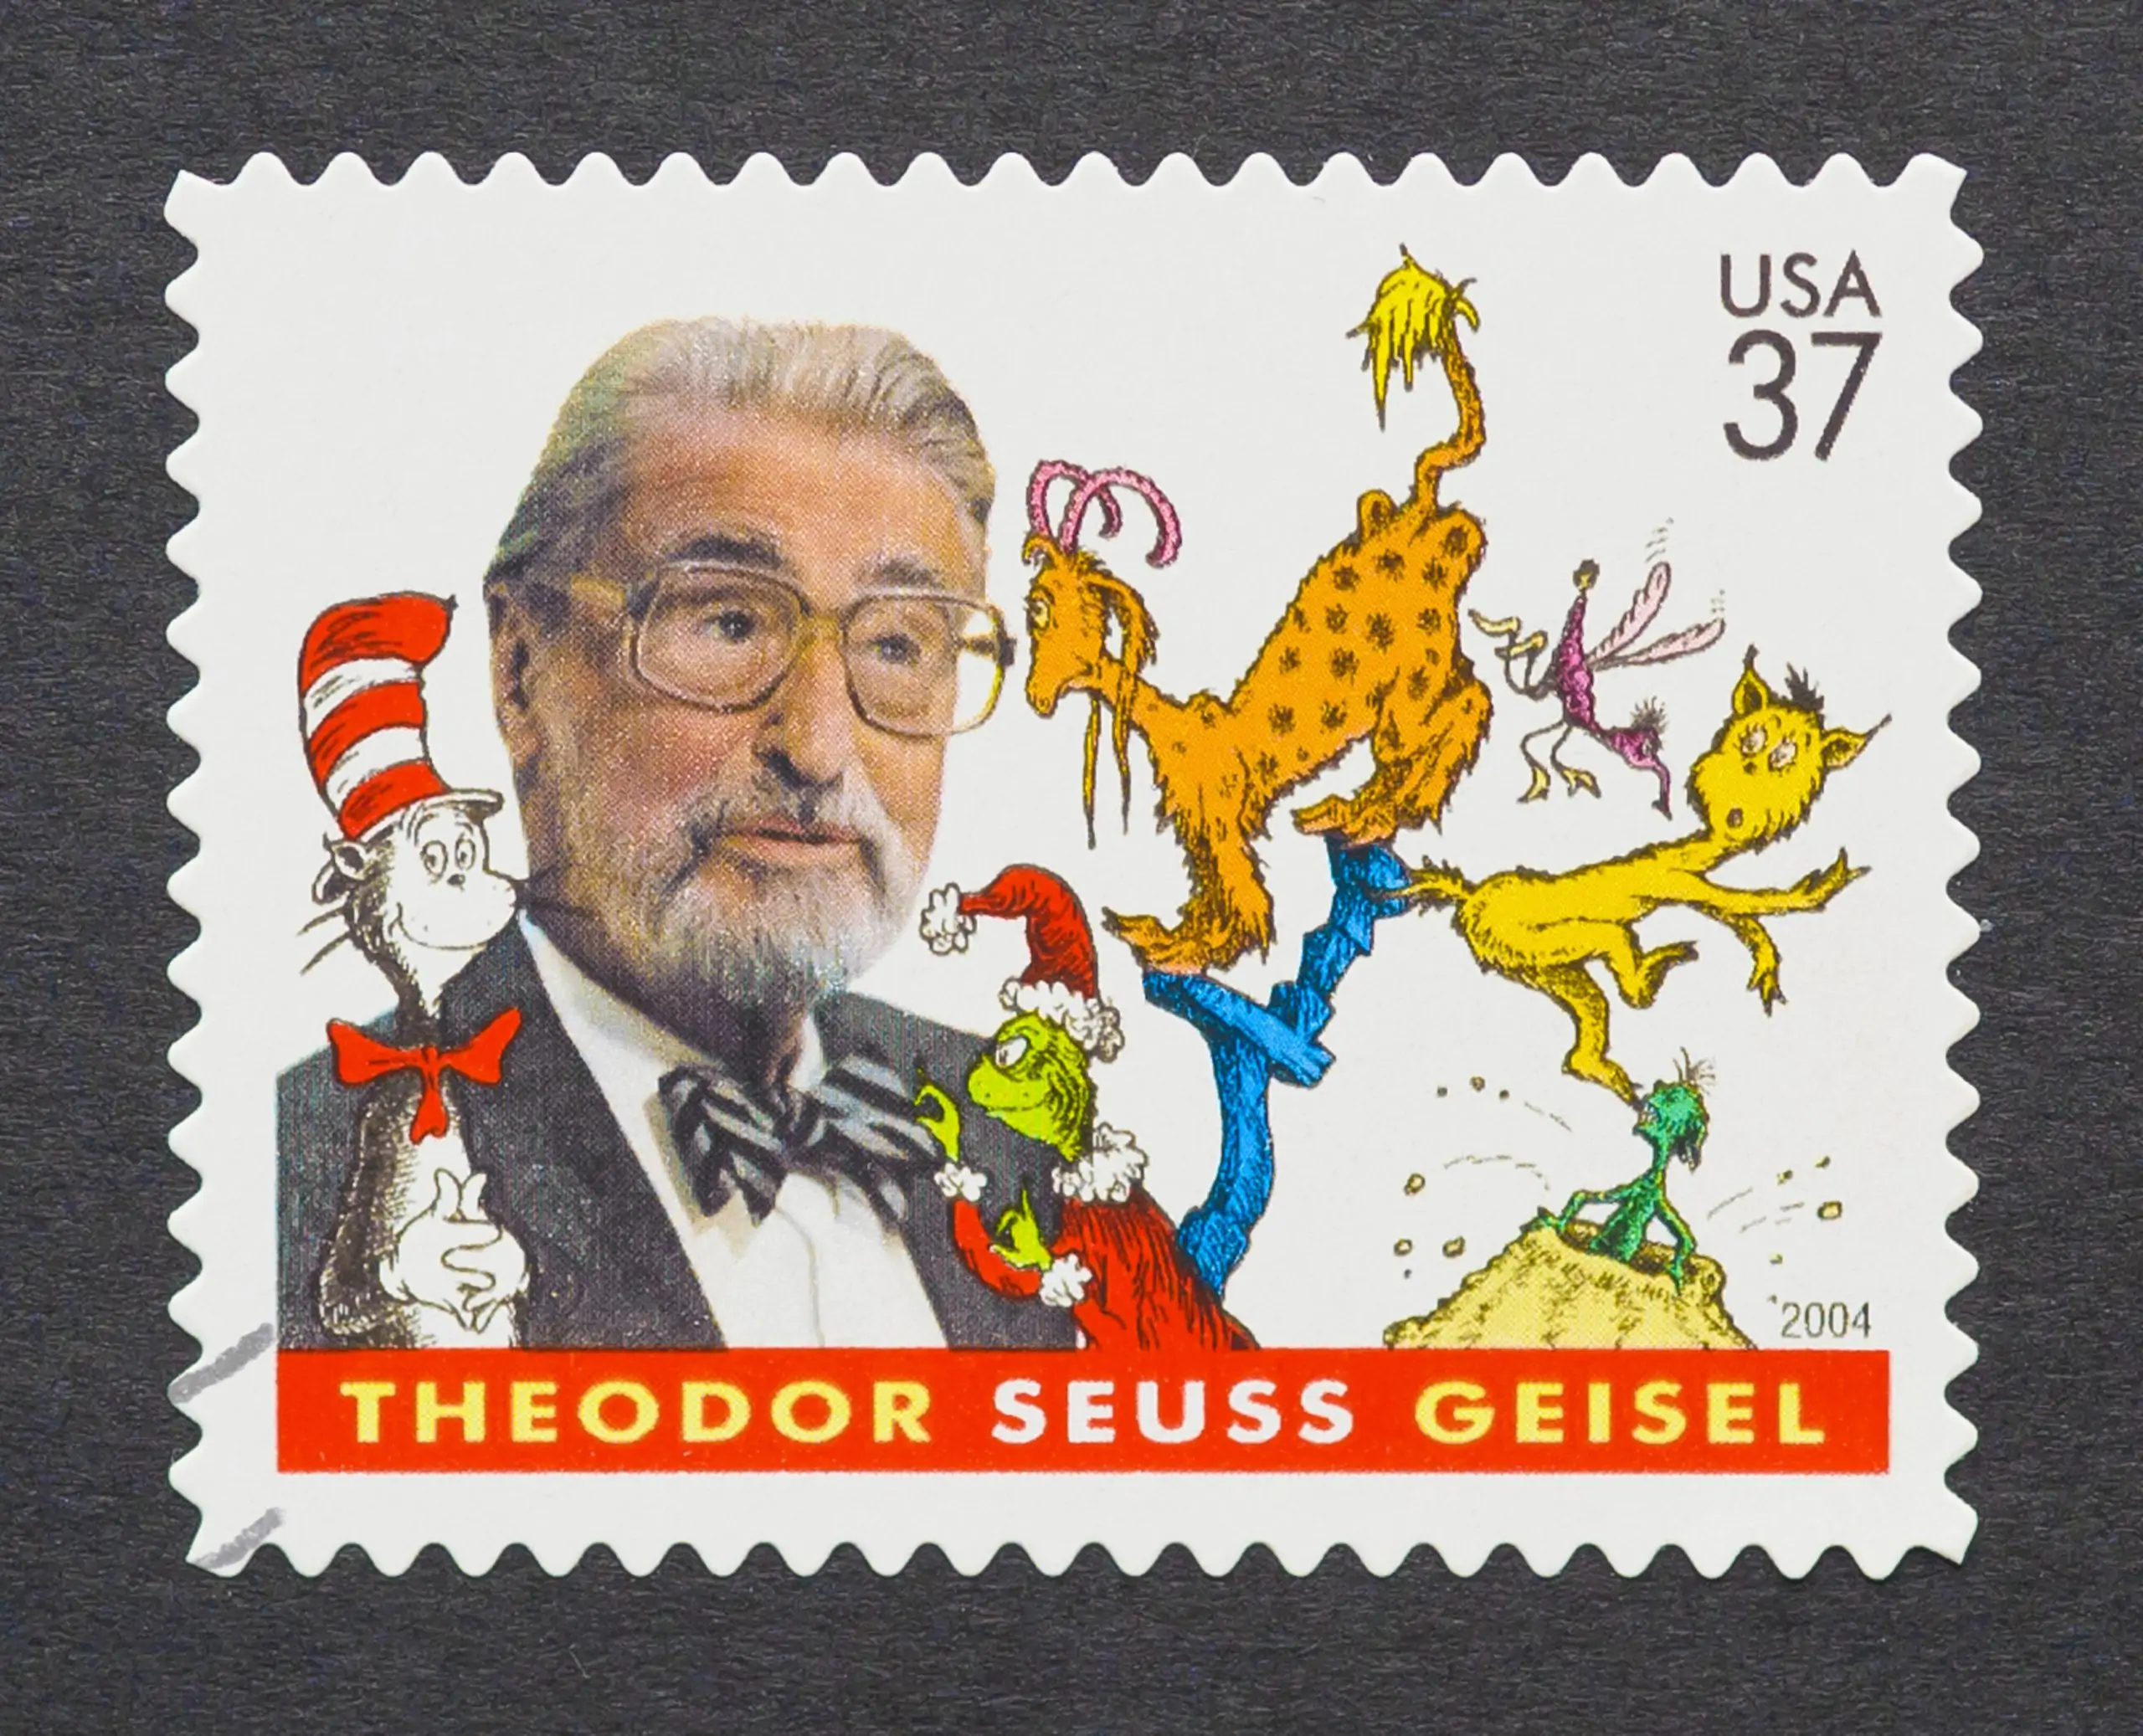 7 Times Doctor Seuss Was Quoted in Court